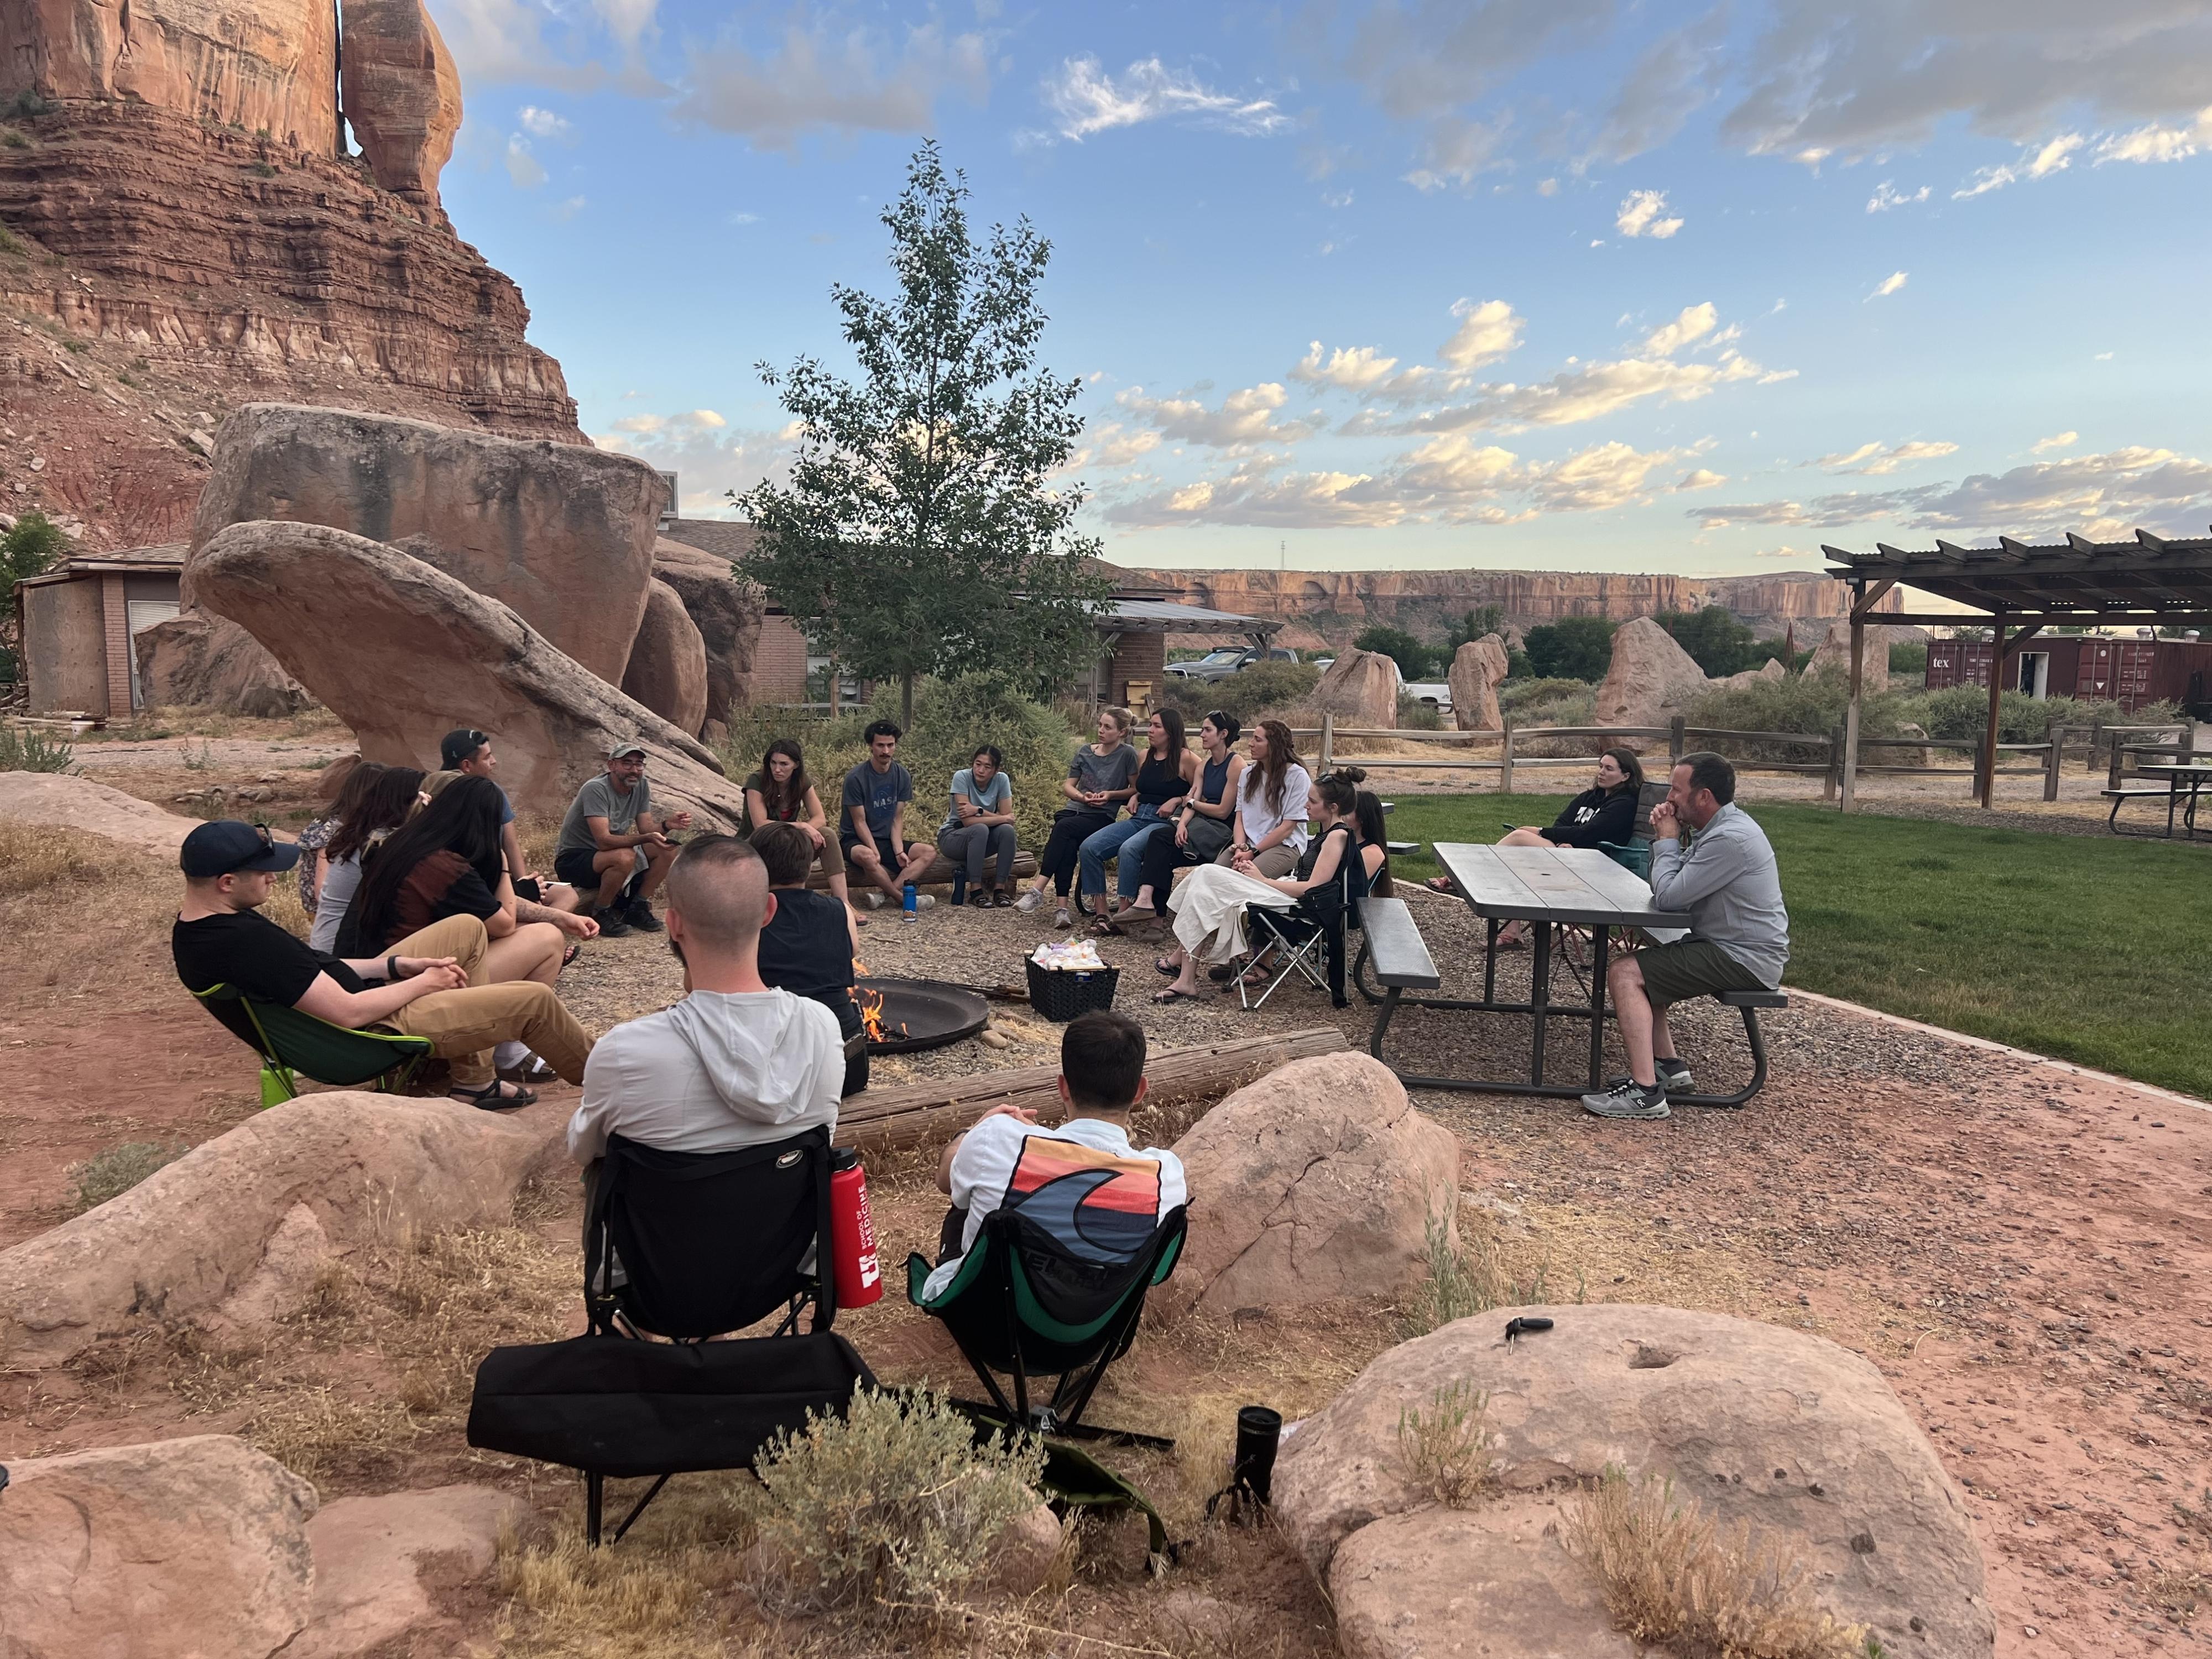 TRUE students gather to reflect on their day at the Montezuma Creek Community Health Center in Blanding, UT.